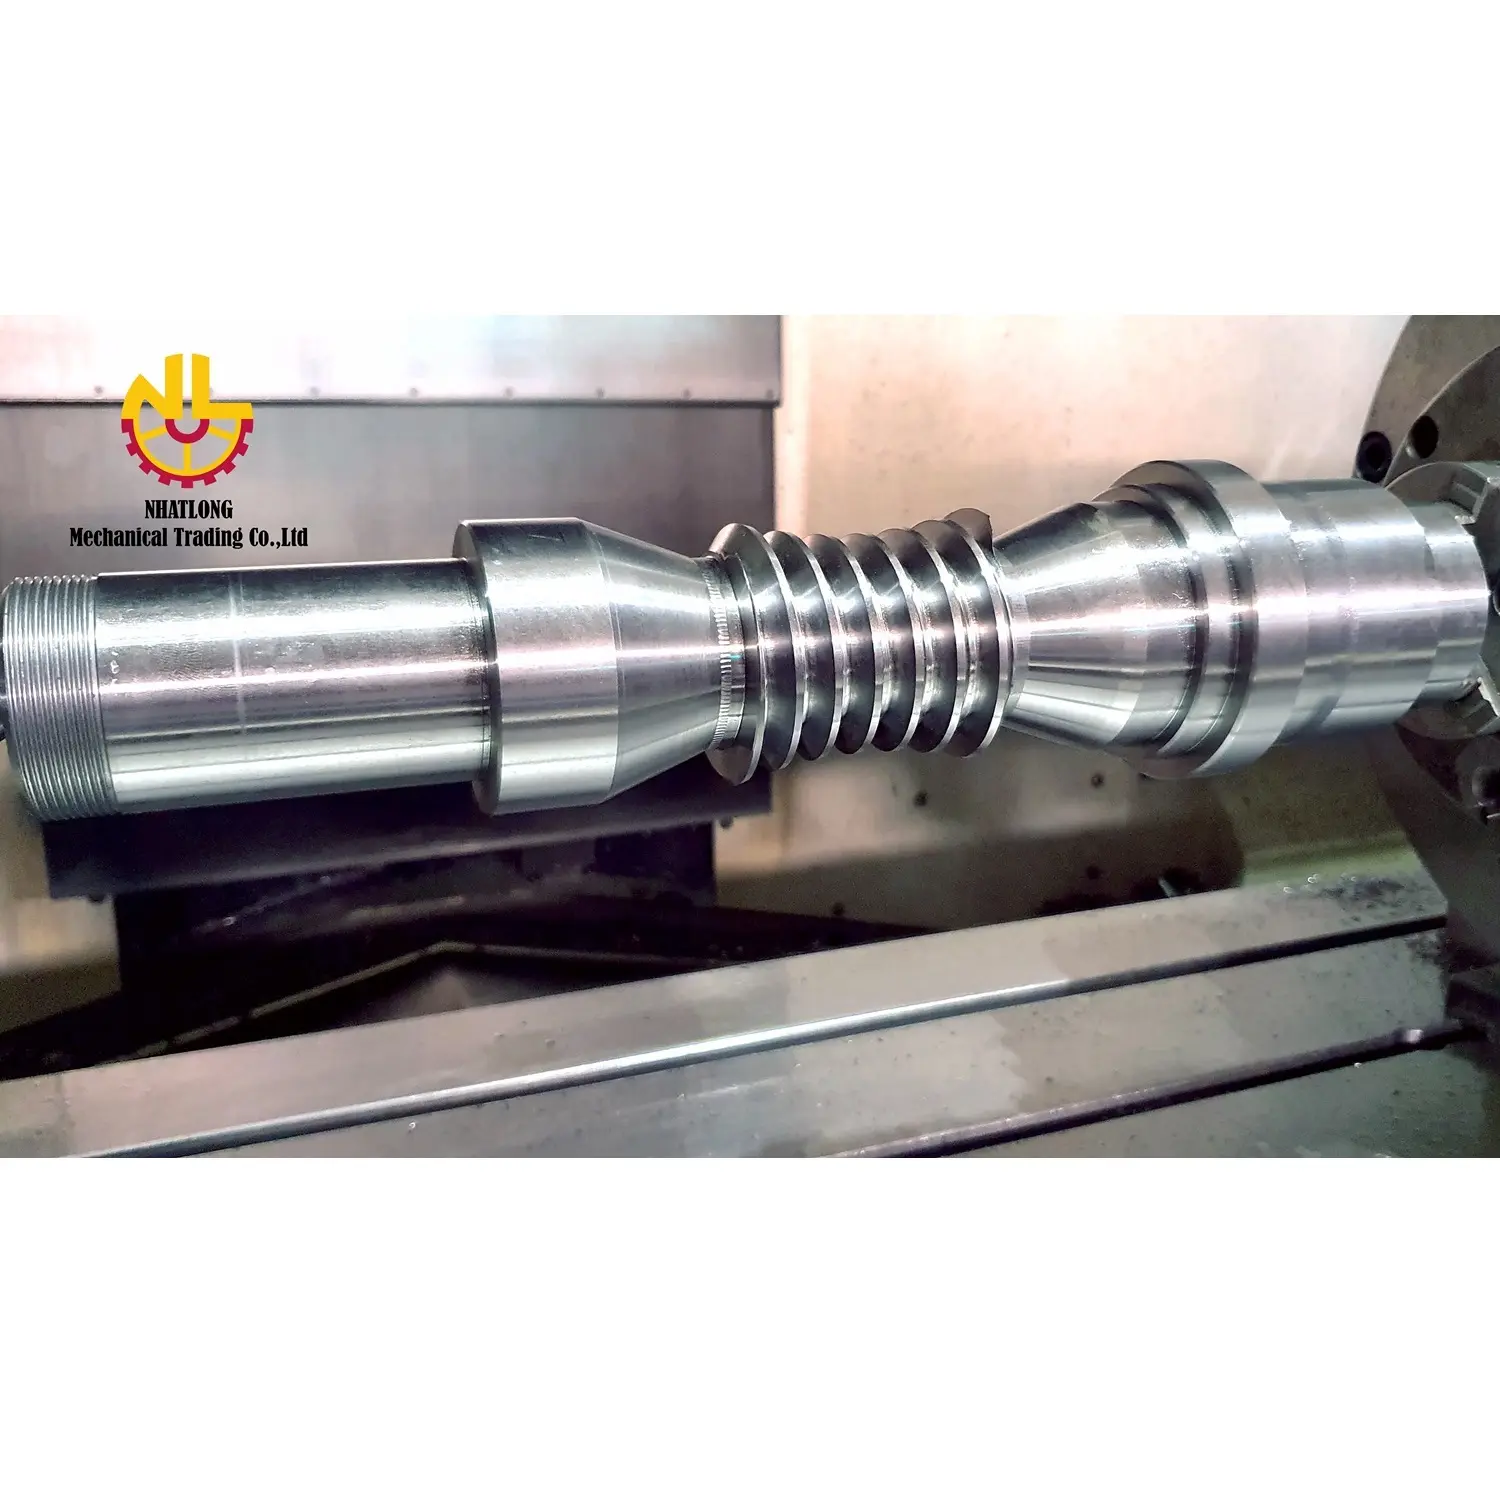 Worm Gear Machinery Repair Shops Flexible Black Oxide Coating Heavy Industrial Equipment Transmission System